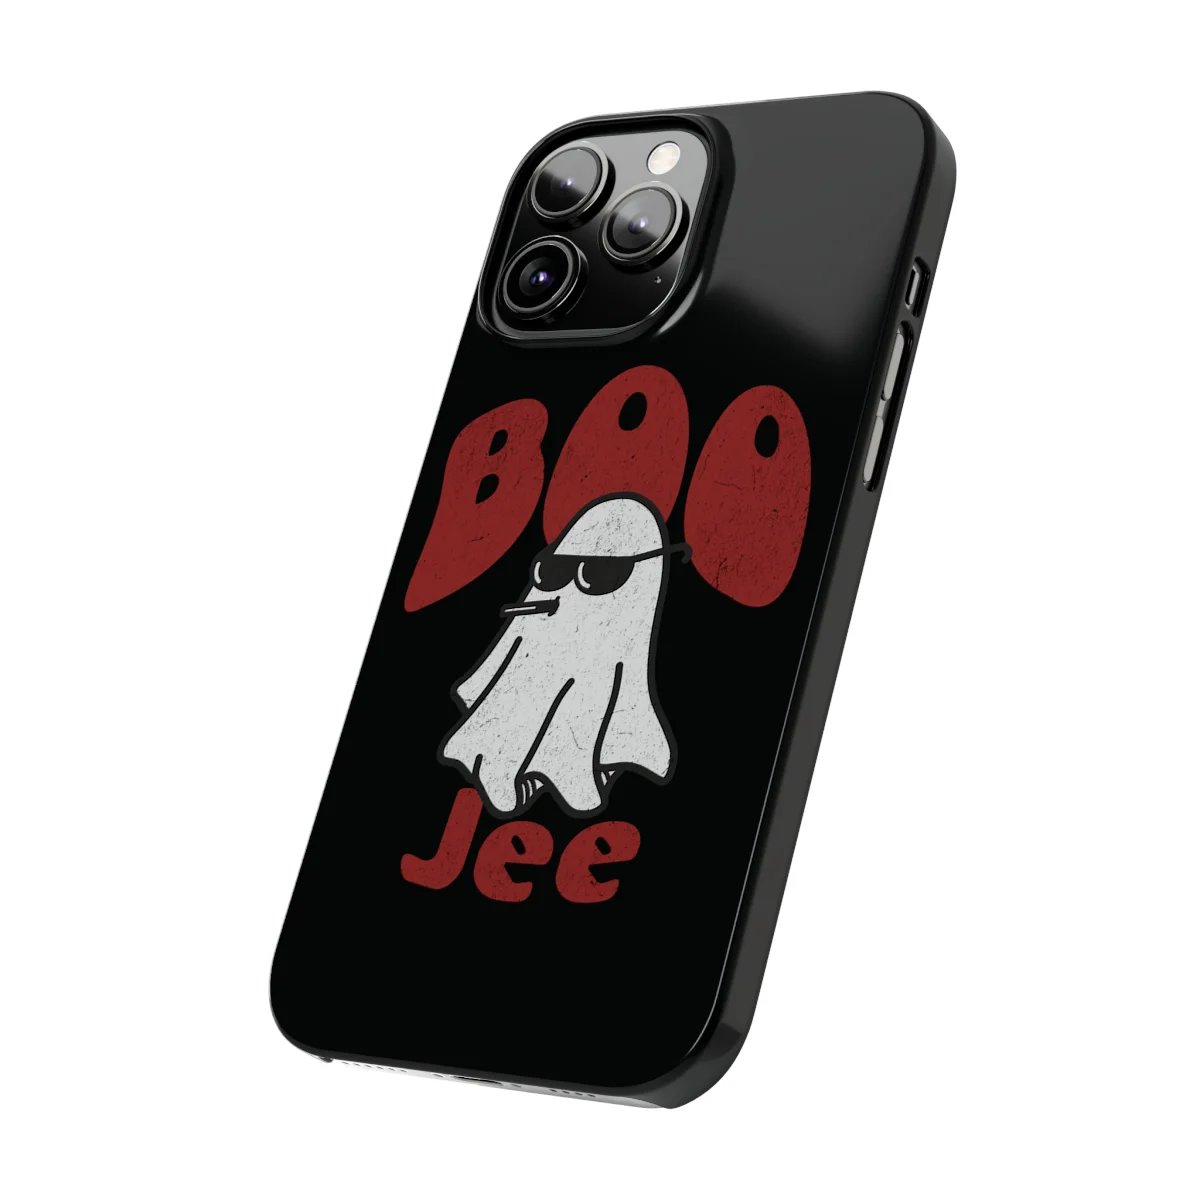 Halloween Phone Cases, Ghost Graphic Design, Slim Phone Accessories, High-Detail Designs, Lexan Polycarbonate Material, Impact Resistant Cases, Wireless Charging Compatible, Lightweight Construction, Glossy Finish, Halloween Accessories, Spooky Phone Cases, Boo Jee Cool Products, Phone Aesthetics, Slim Design Cases, Durable Phone Protection, Halloween Style